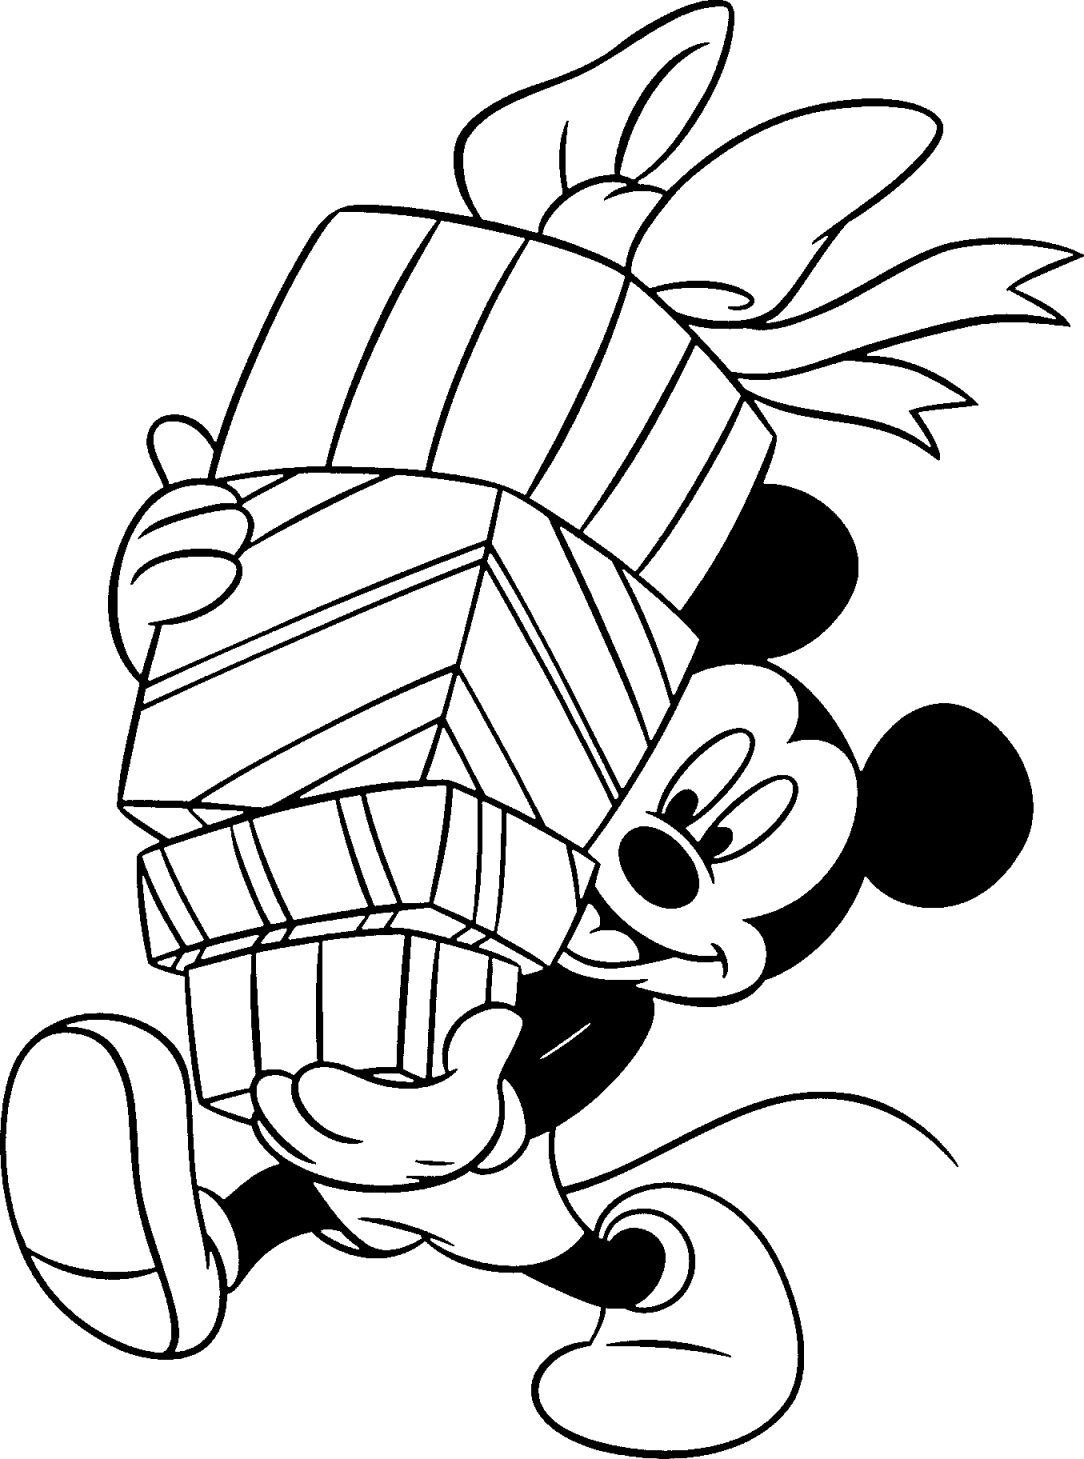 Christmas Coloring Pages Disney 8